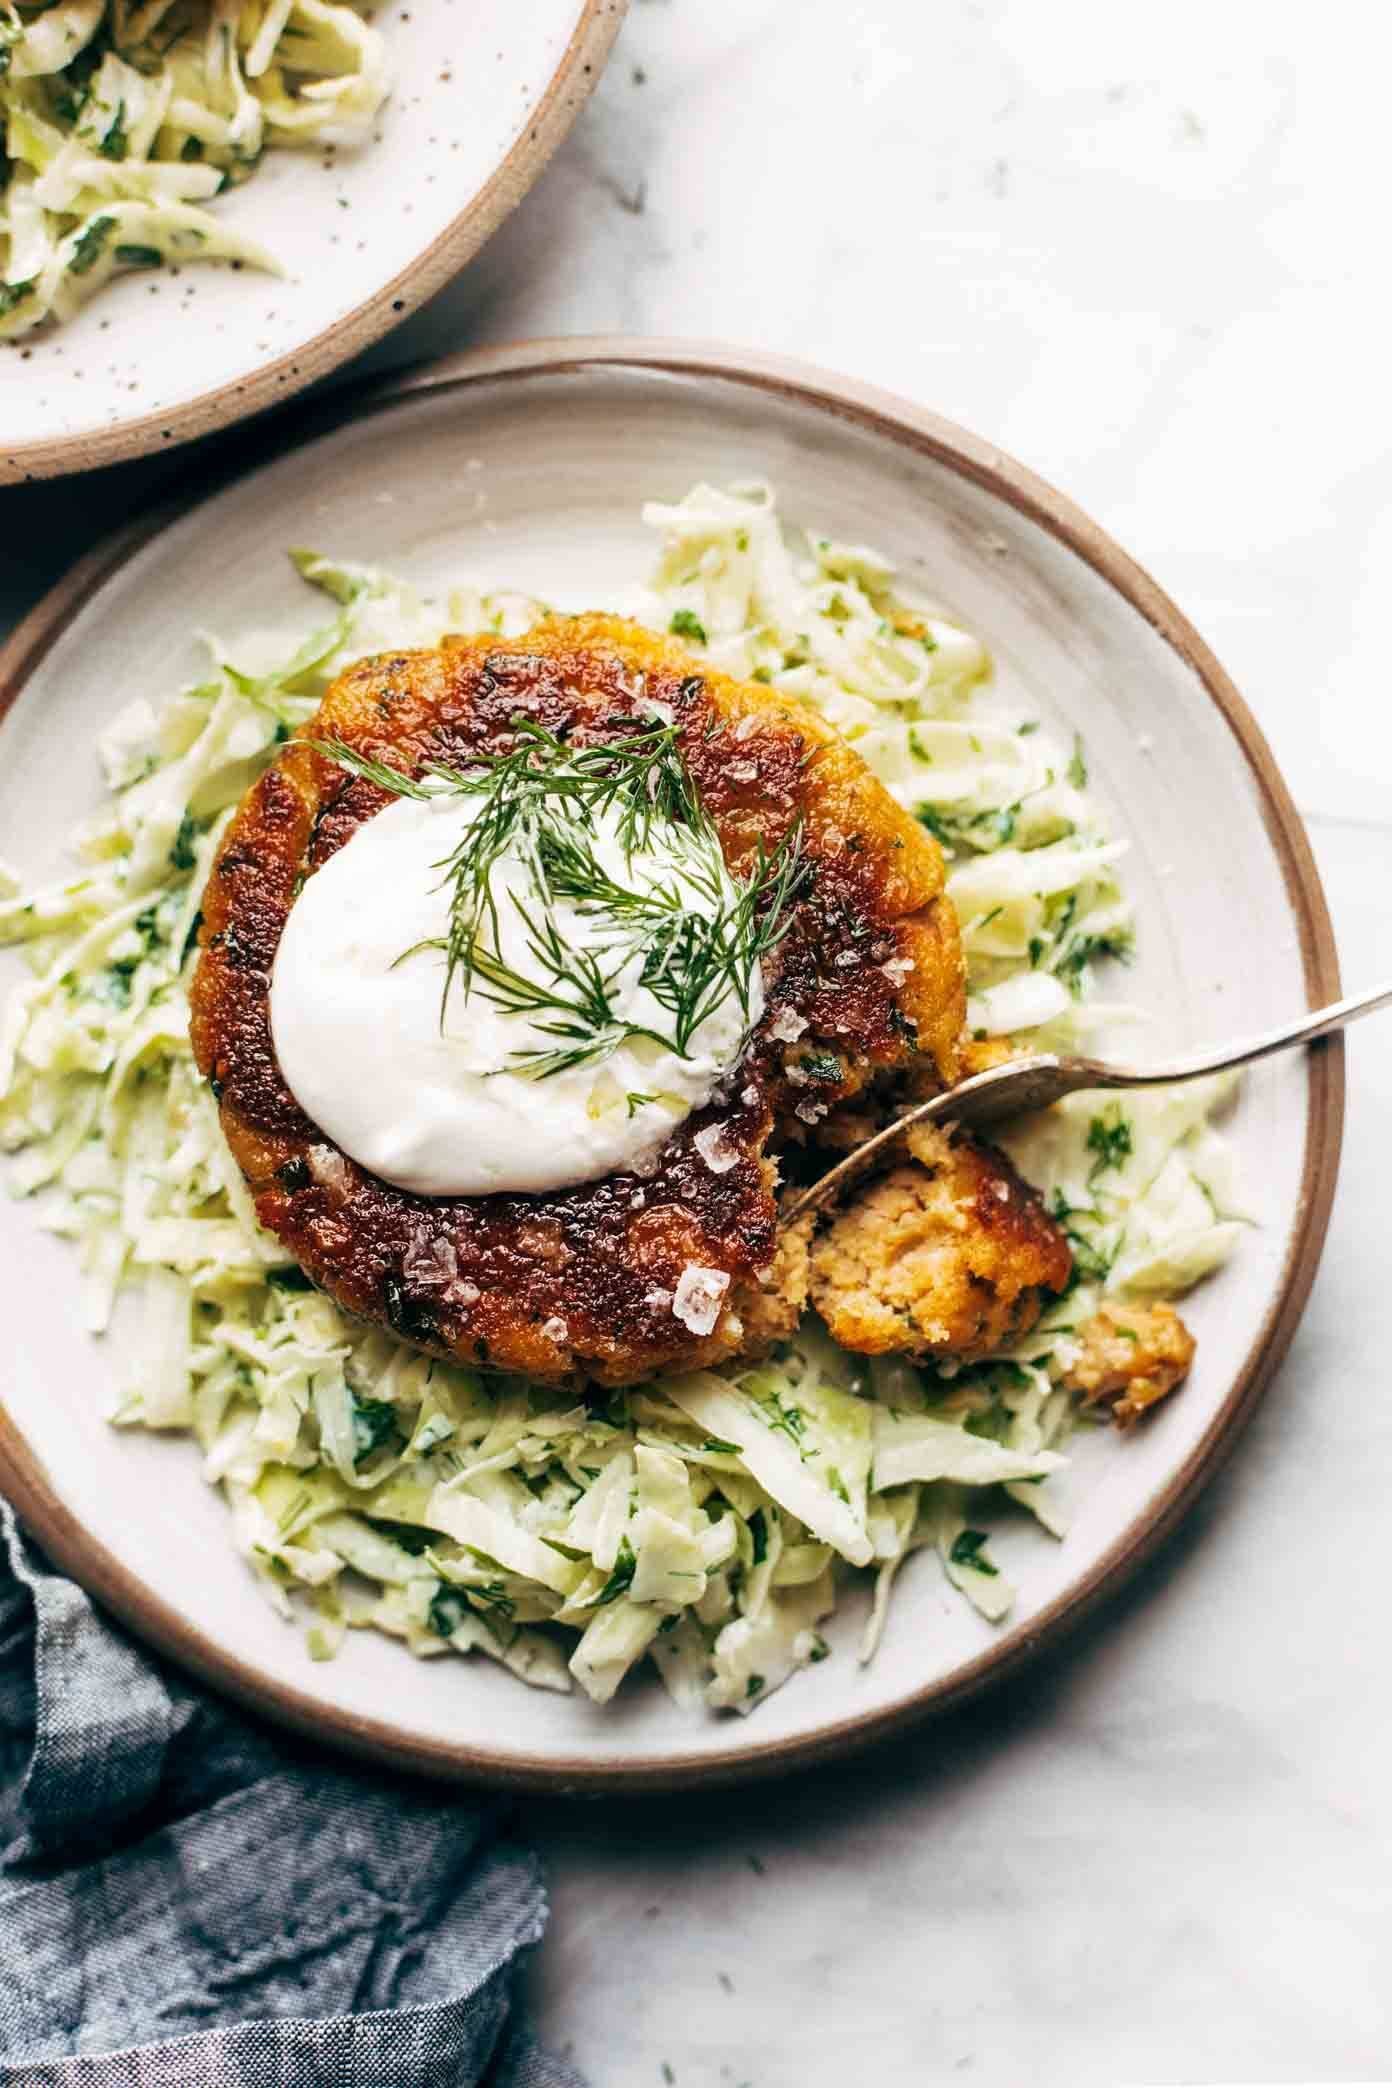 Salmon burger on a bed of cabbage with a dollop of yogurt on top.